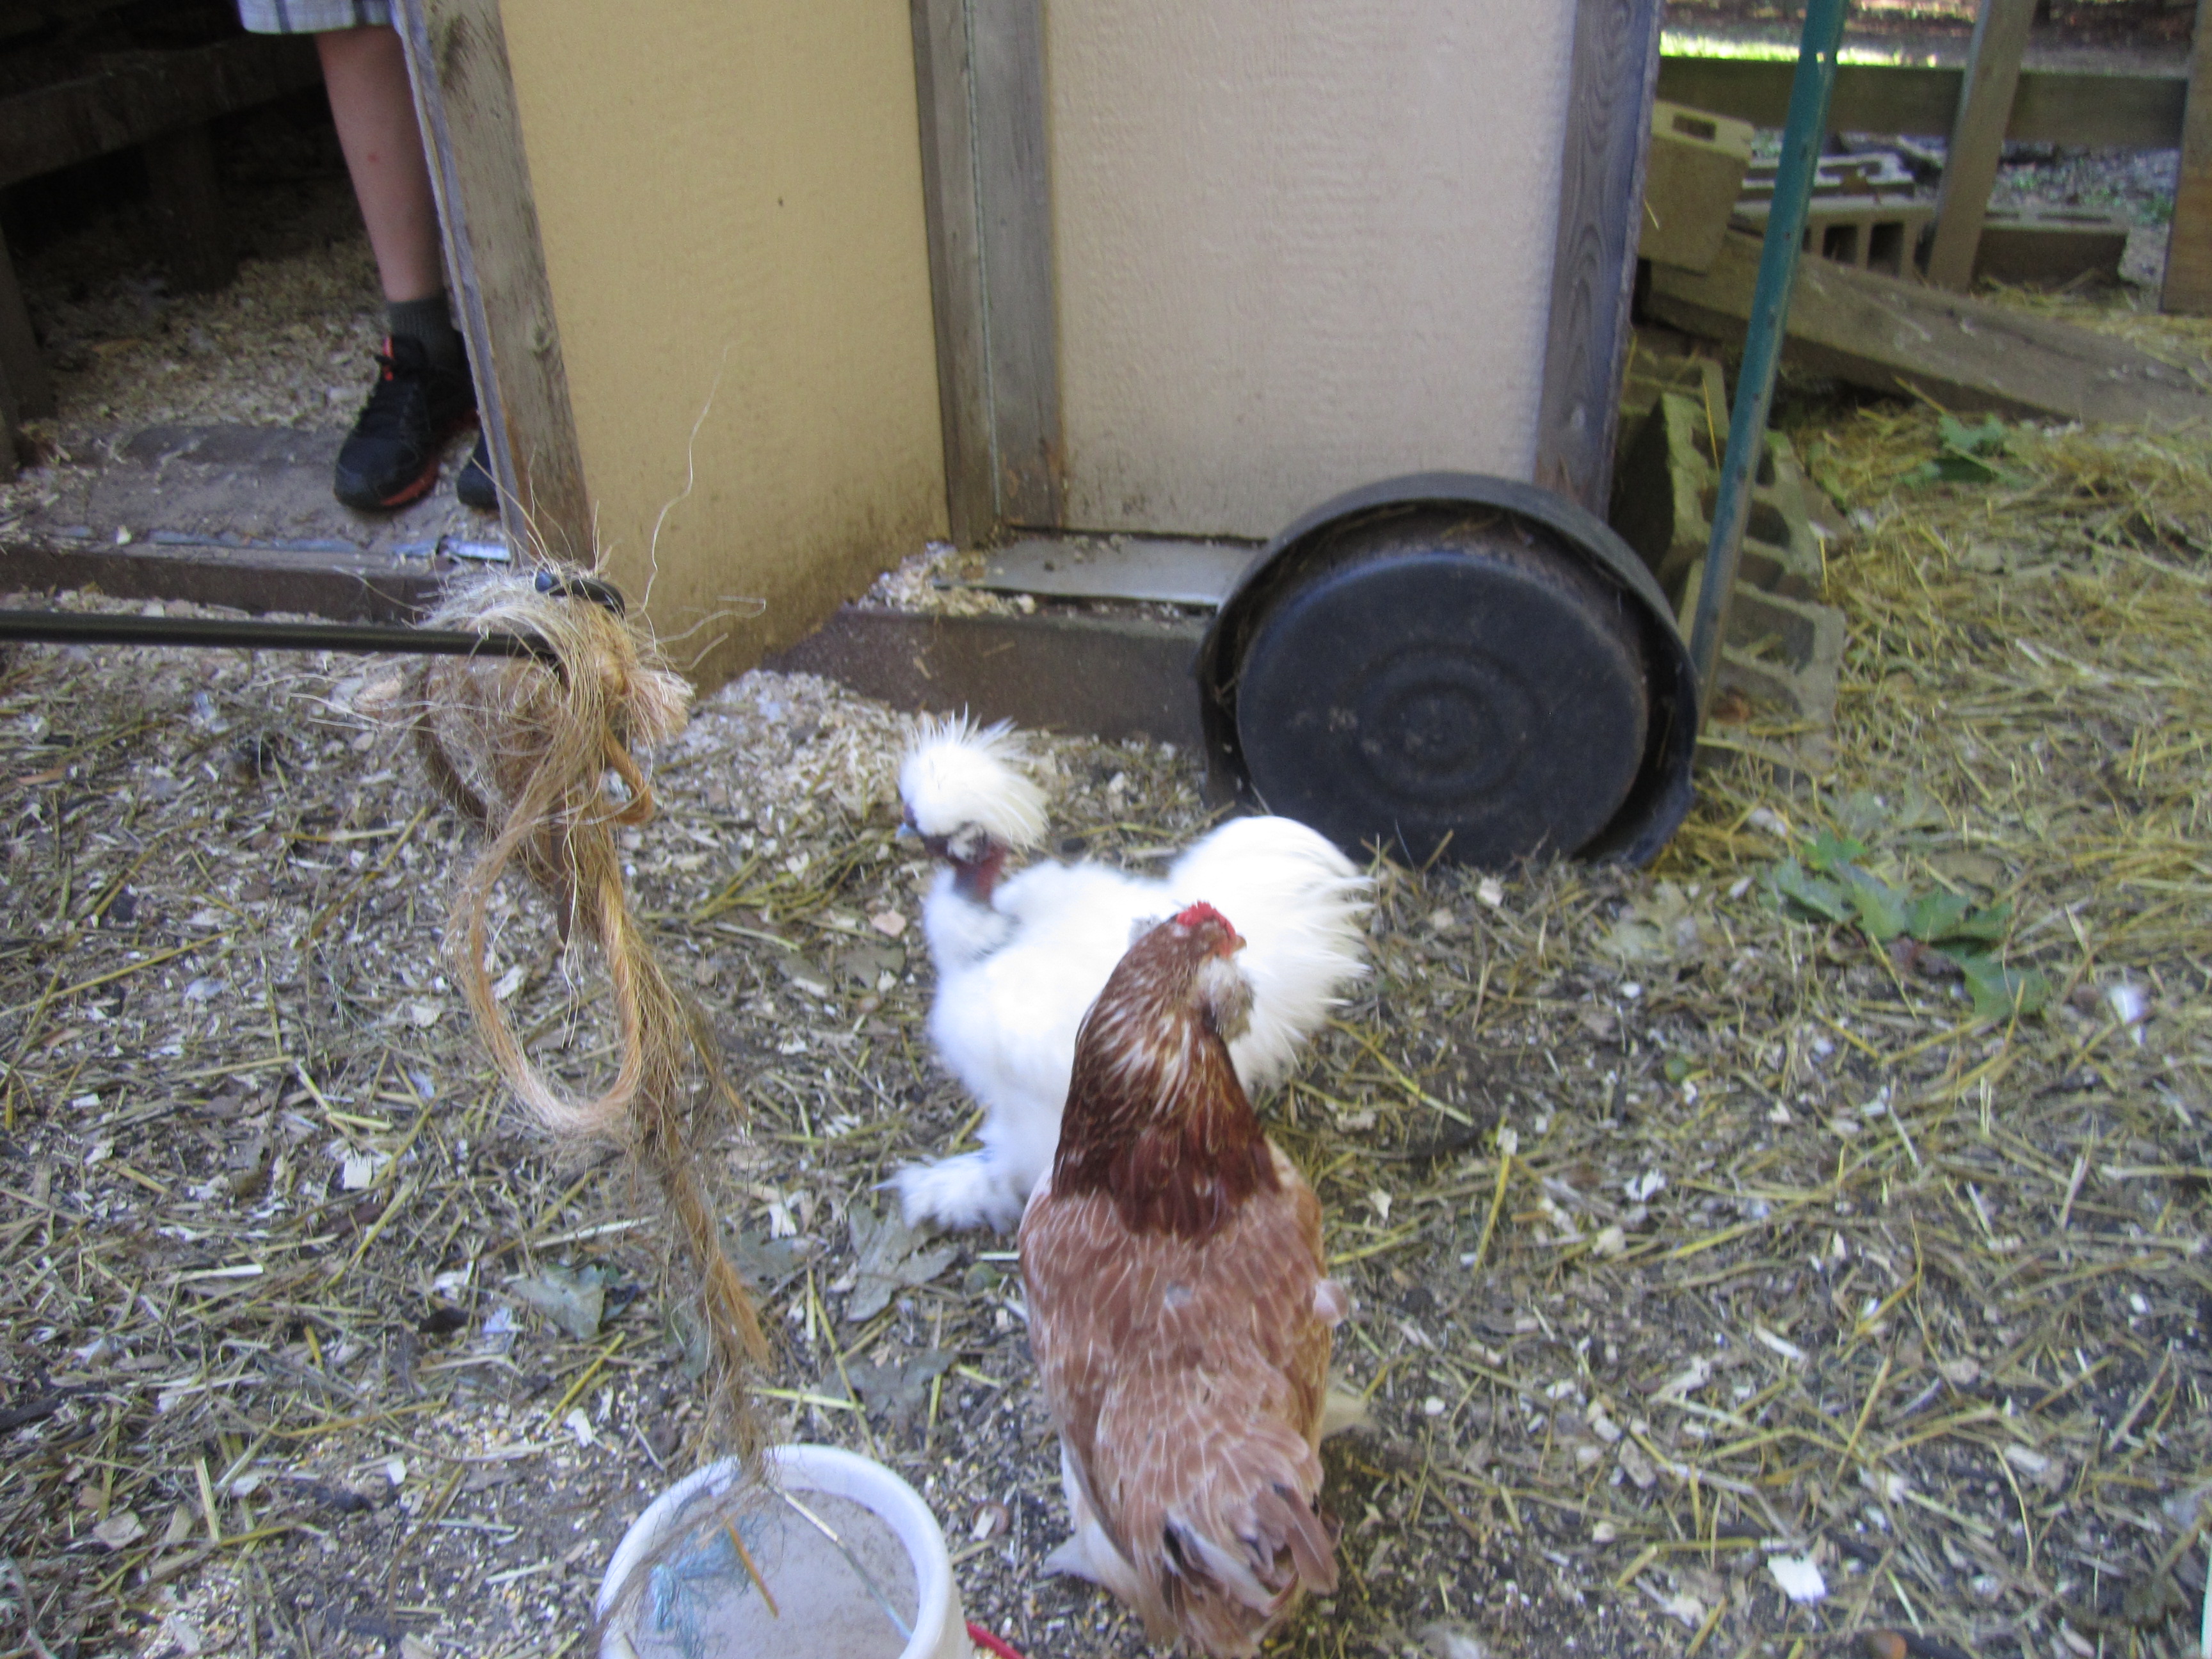 Here's my brother's rooster, Maurado, with his girlfriend, Beardo.